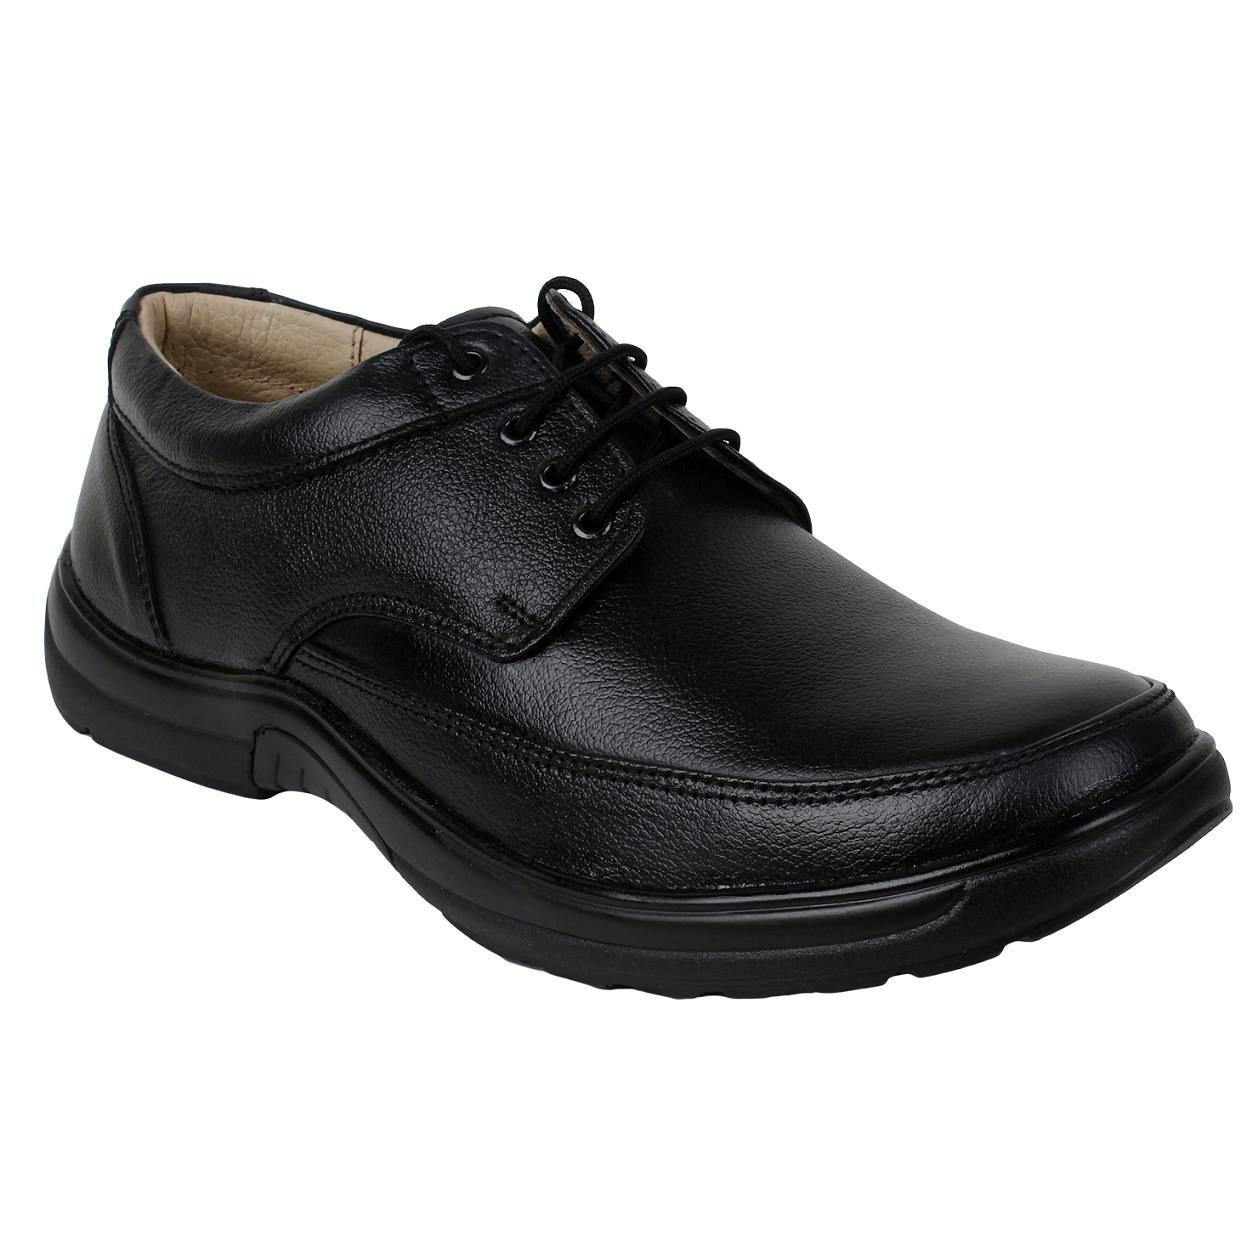 Leather Shoes For Men. - SeeandWear